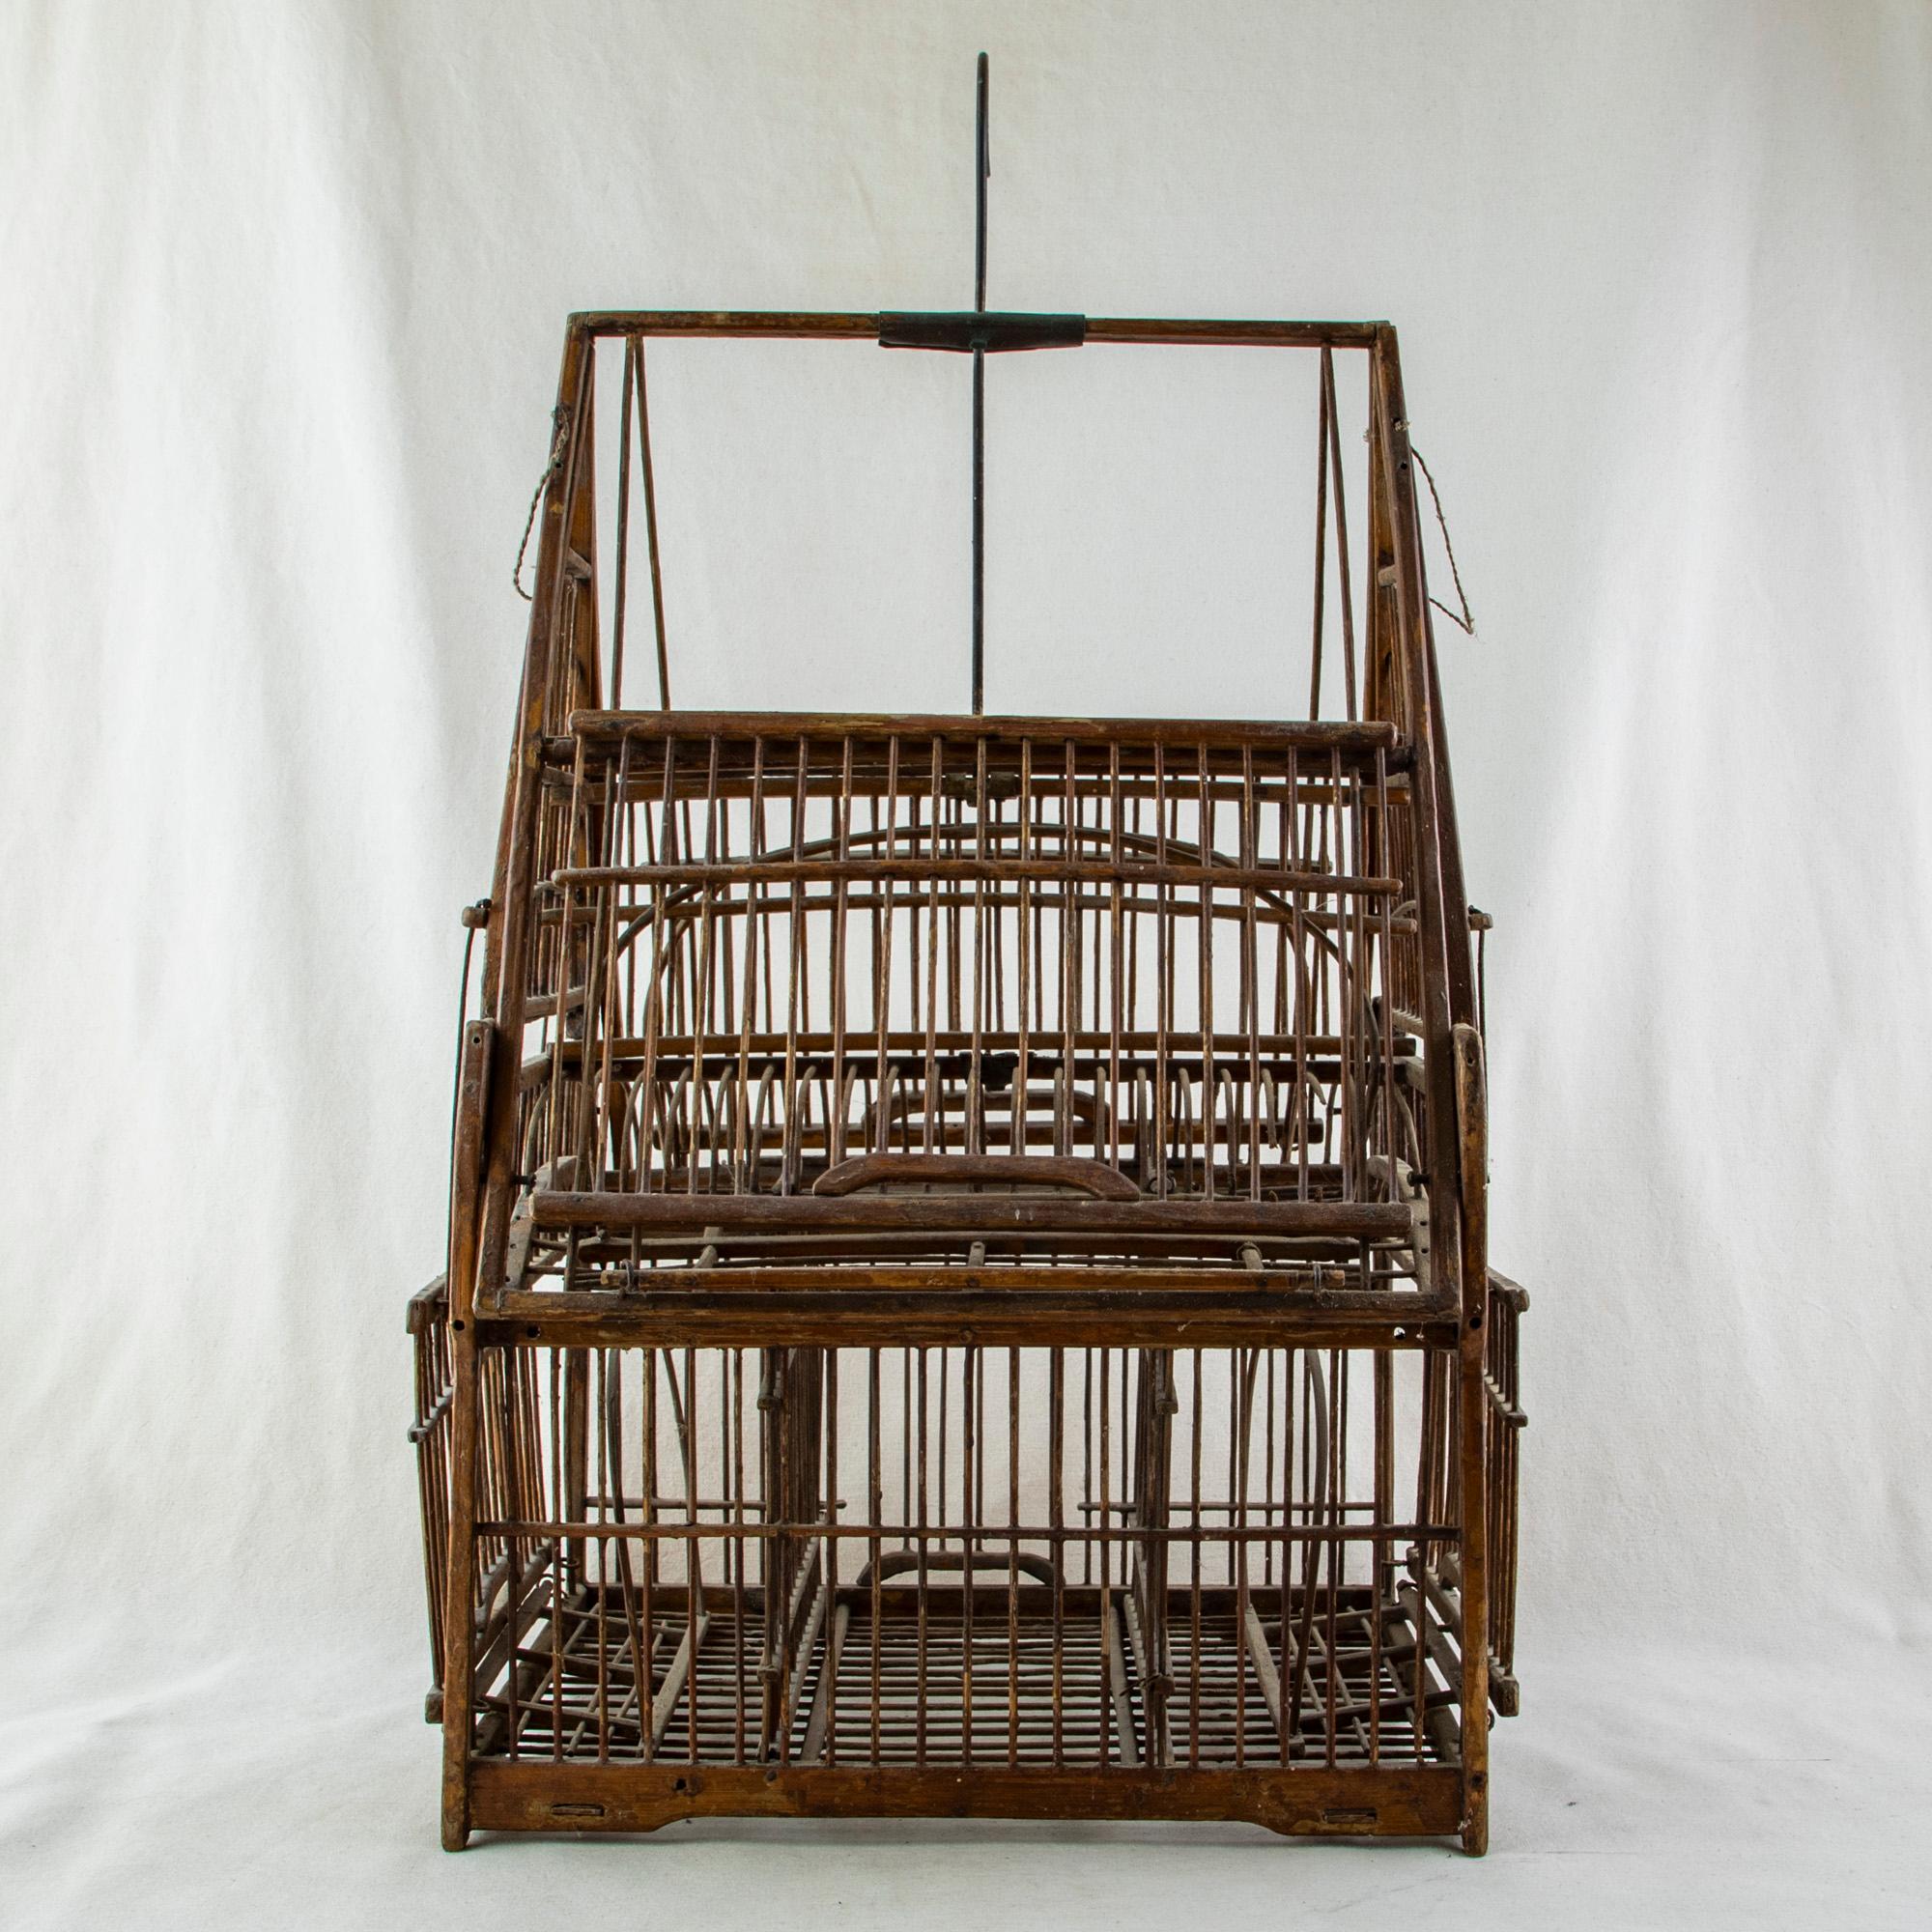 This mid-nineteenth century artisan-made Chinese birdcage is constructed of wood and wire and features several compartments accessed by sliding doors. The cage has a central hook at the top allowing it to be hung from the ceiling. c. 1860.